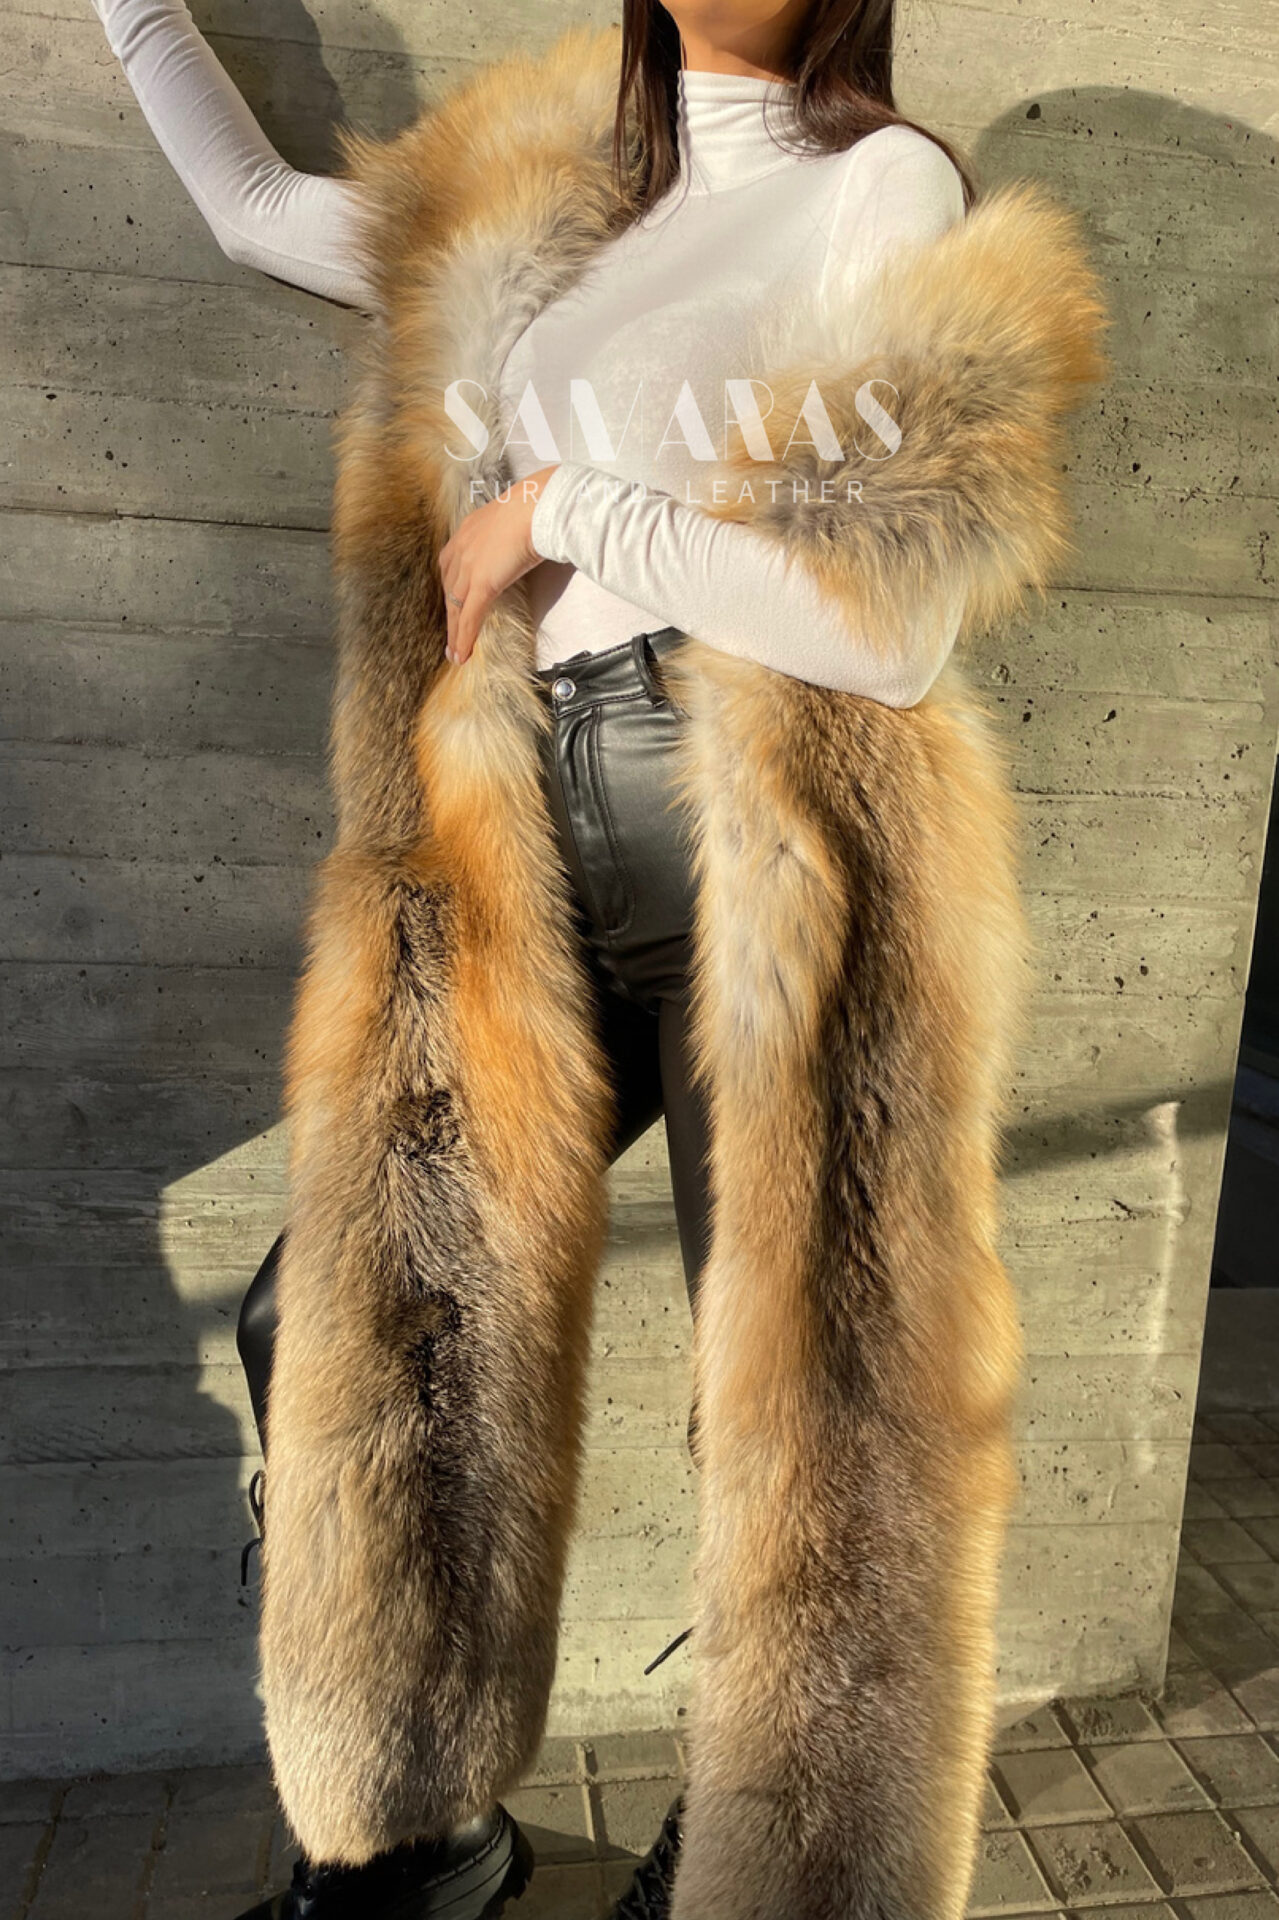 Fur Boas made from Fox Tails from SAGA Furs foxes